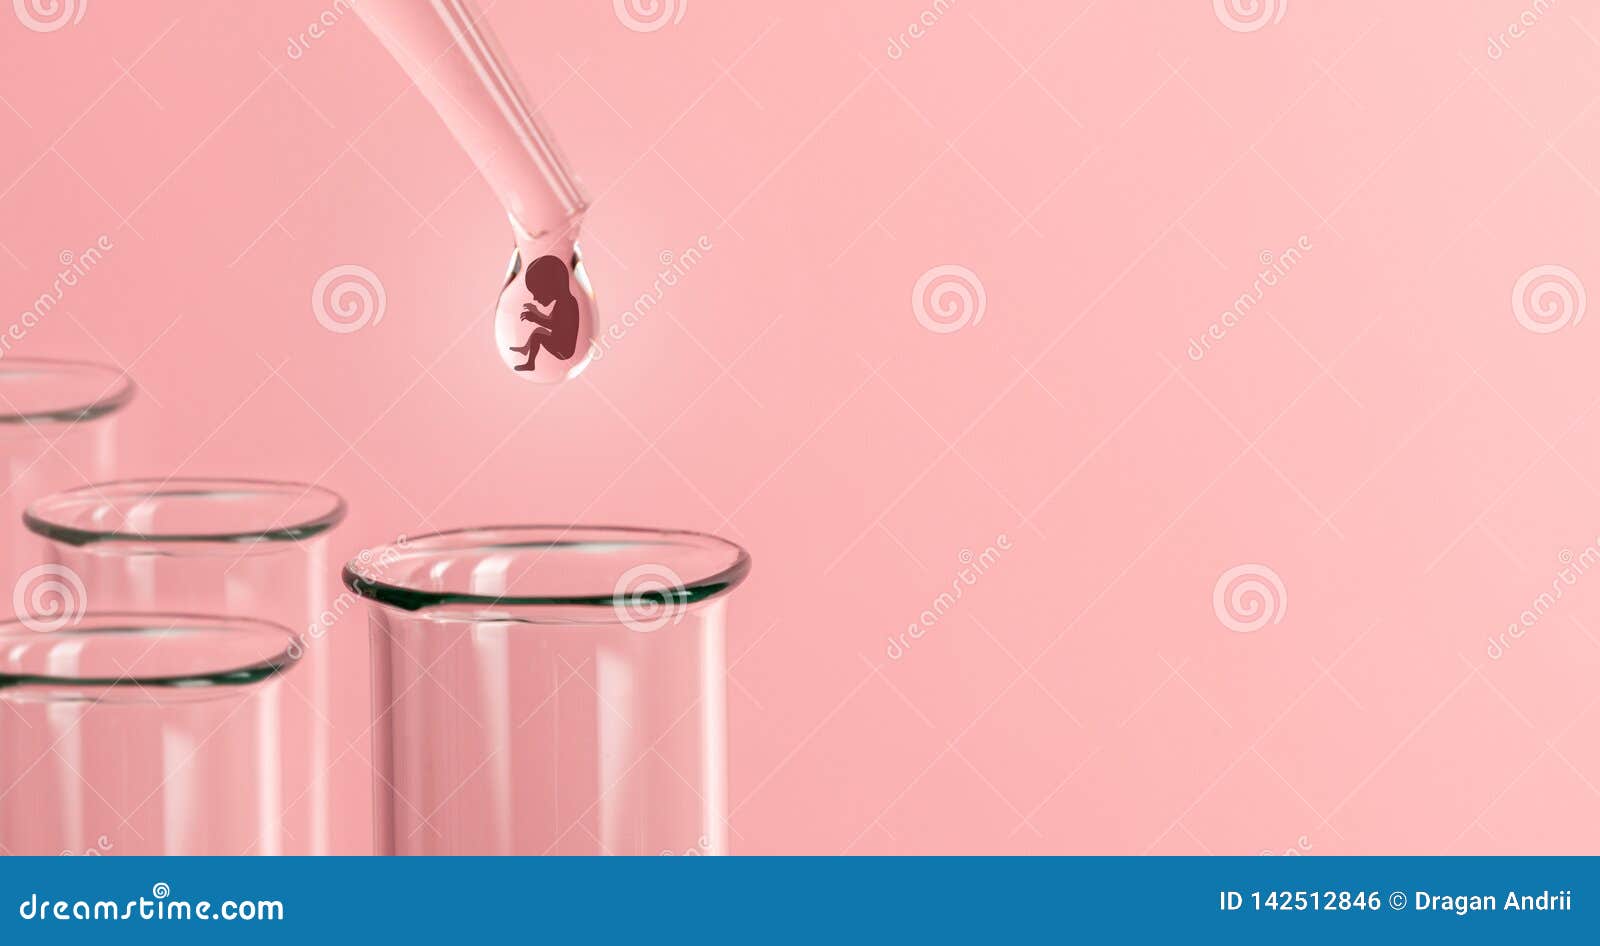 artificial insemination. test tube baby, ivf. on the tip of the pipette drop with silhouette of the embryo of the child, dripping